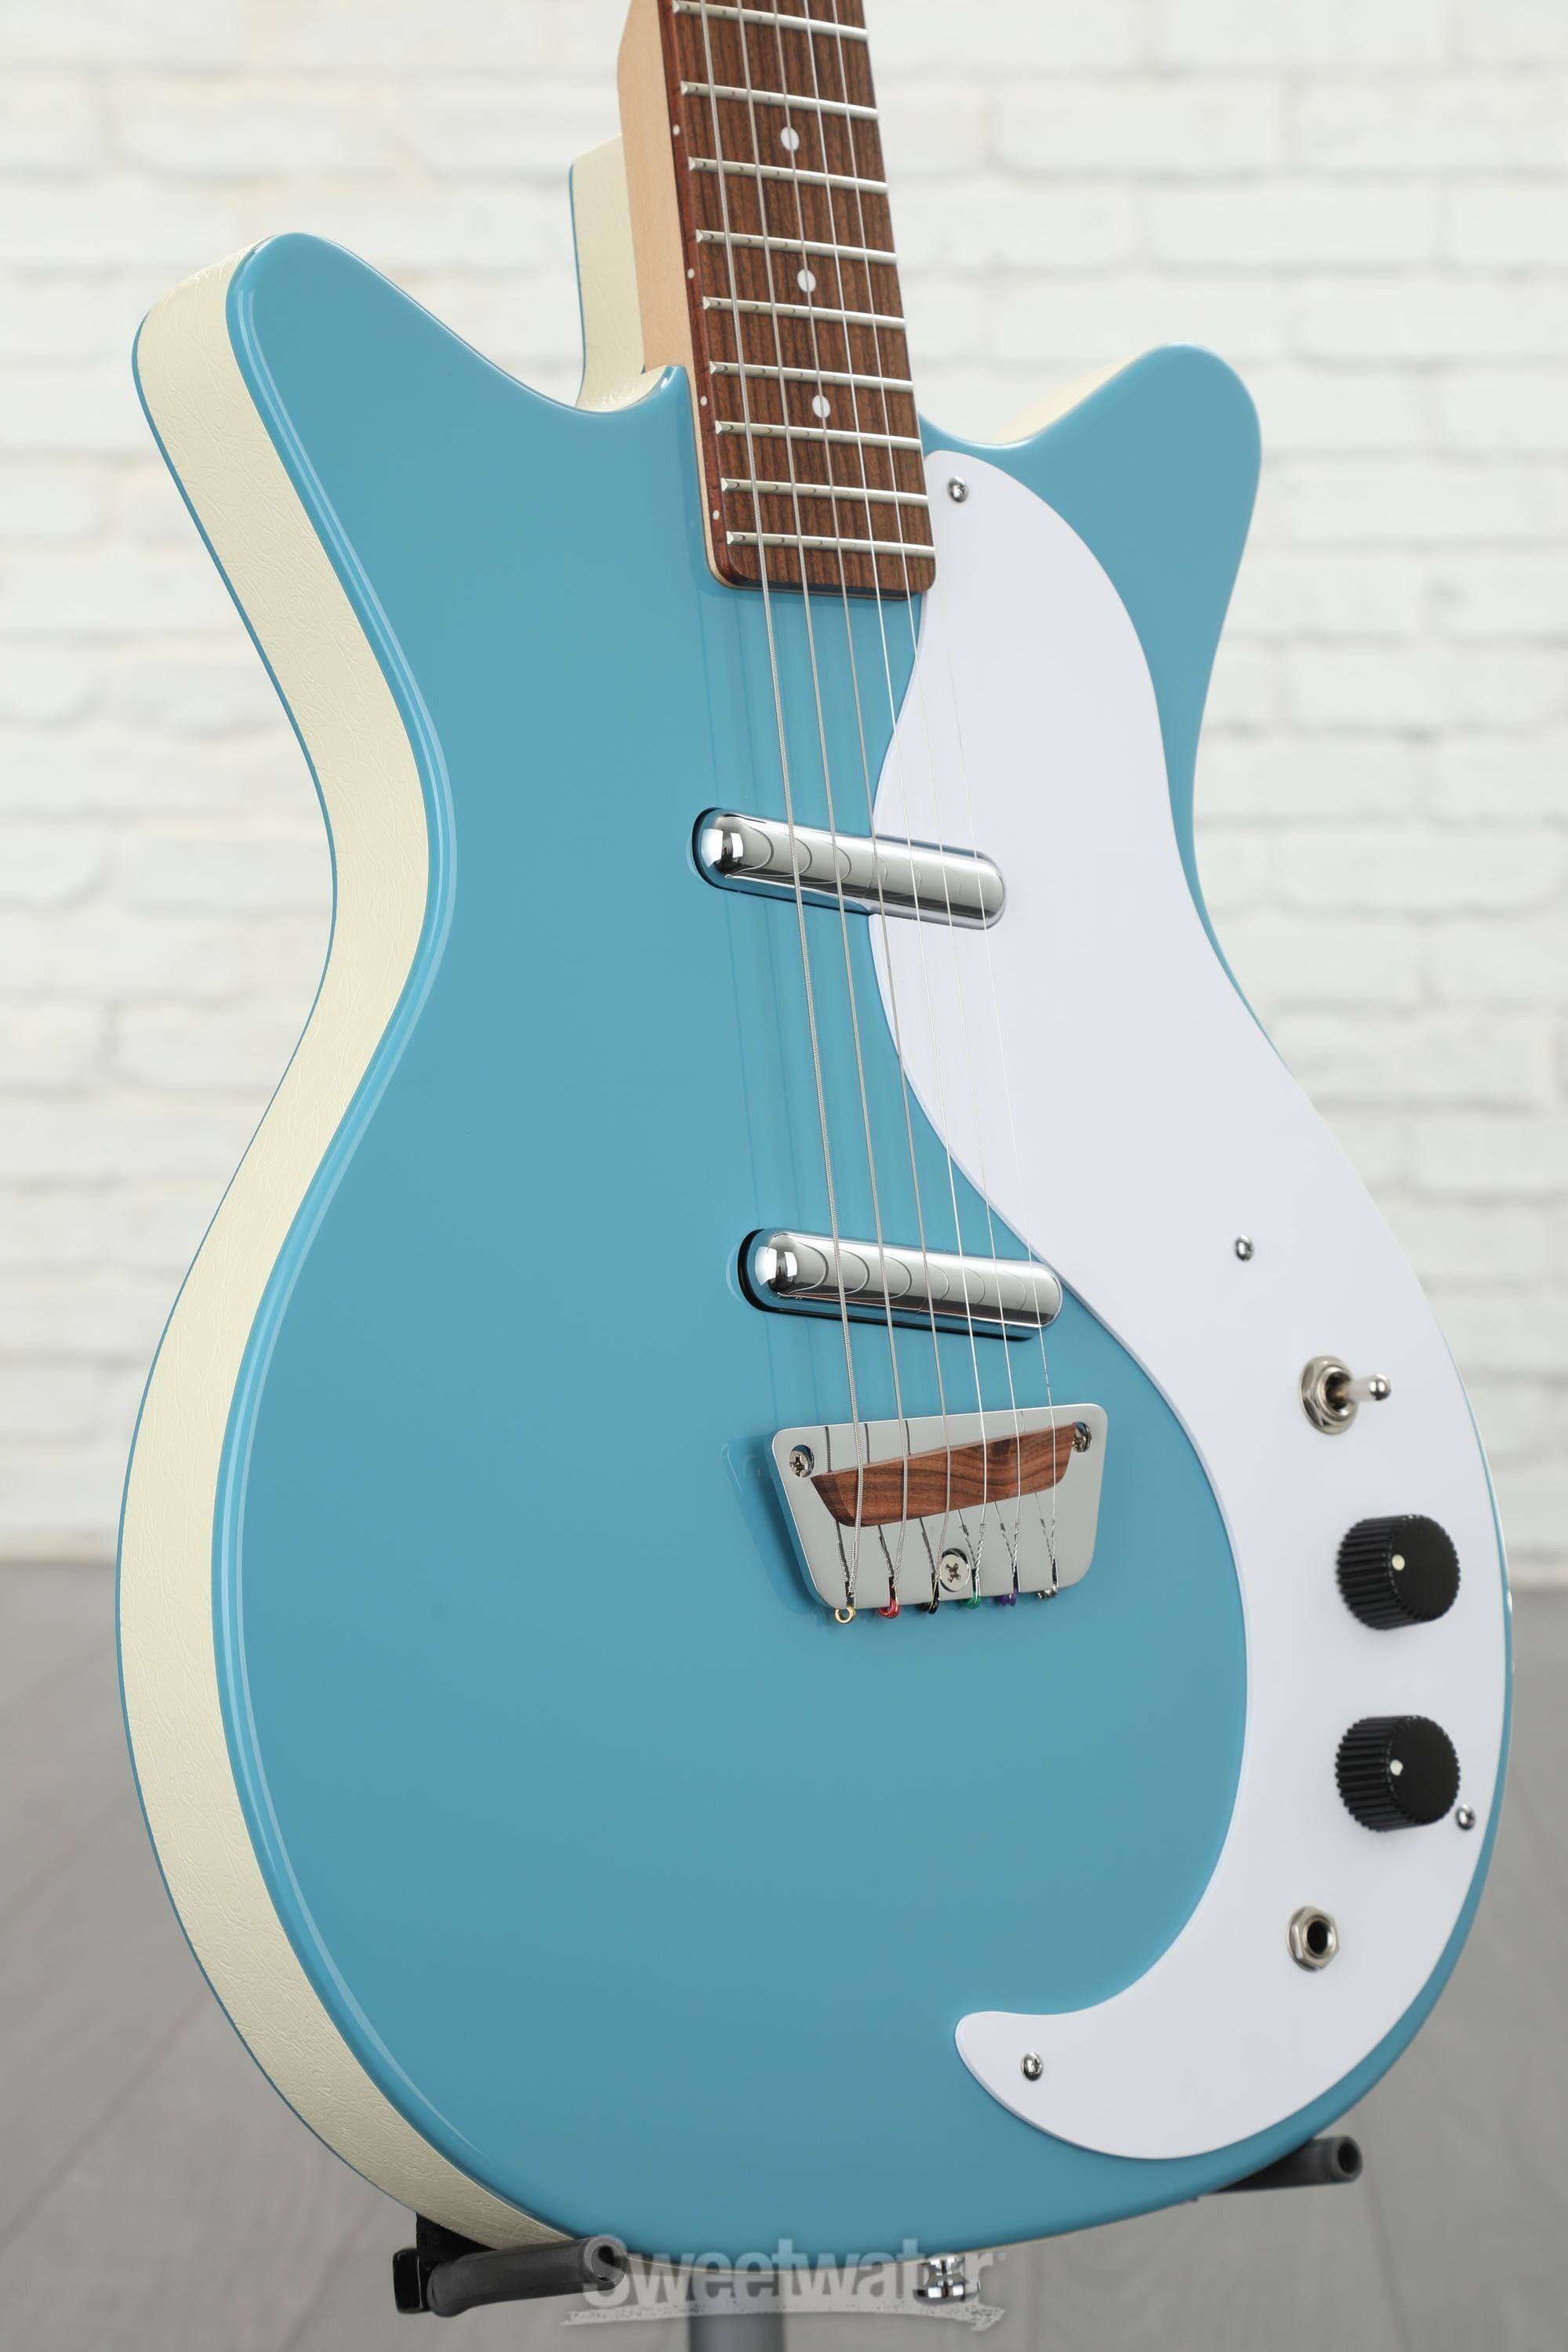 Danelectro Stock '59 Electric Guitar - Turquoise | Sweetwater